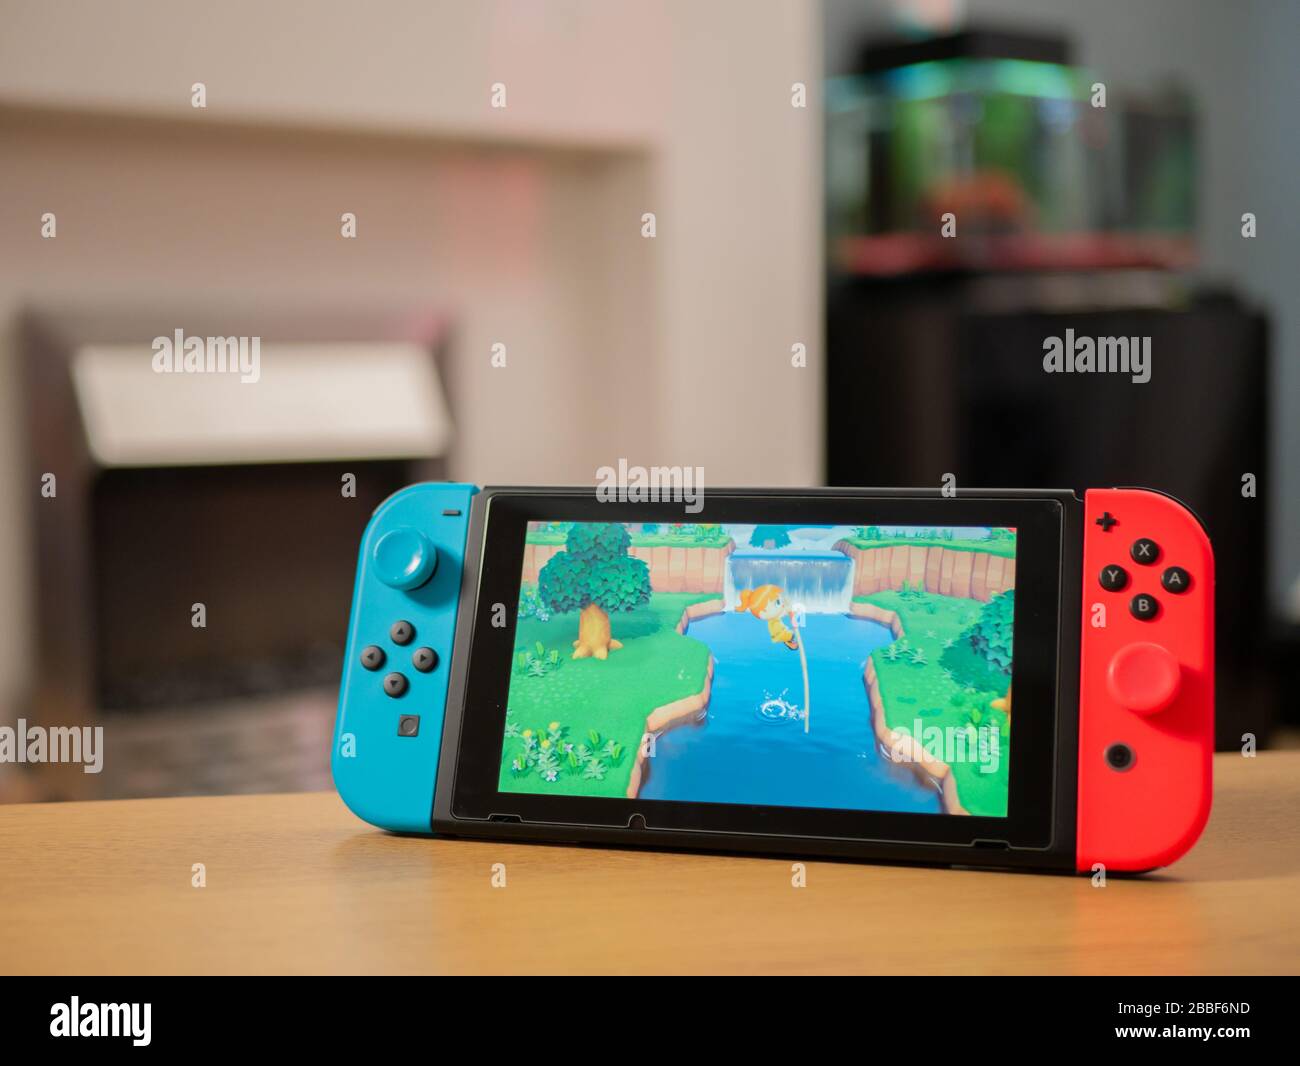 UK, March 2020: Nintendo Switch games console animal crossing character  over river Stock Photo - Alamy